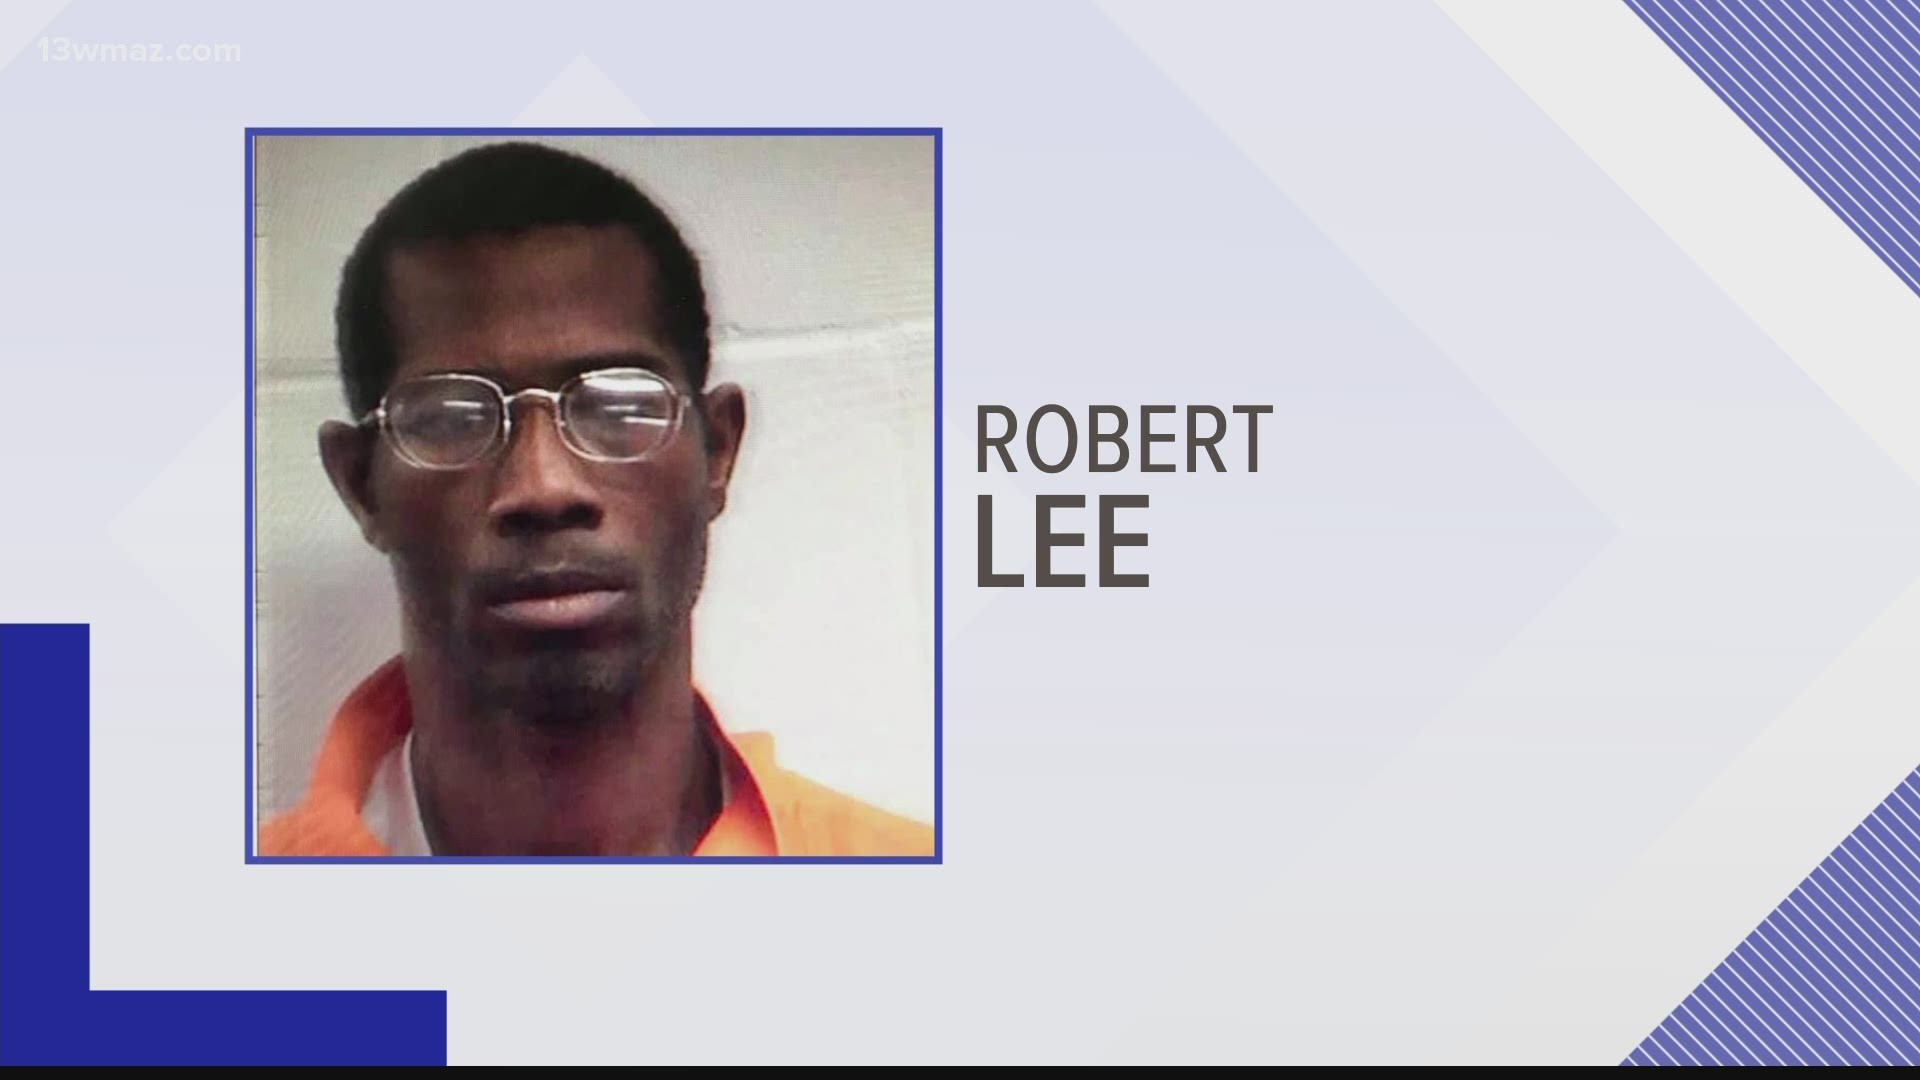 According to a Facebook post on the sheriff's office's page, Robert C. Lee is considered dangerous.